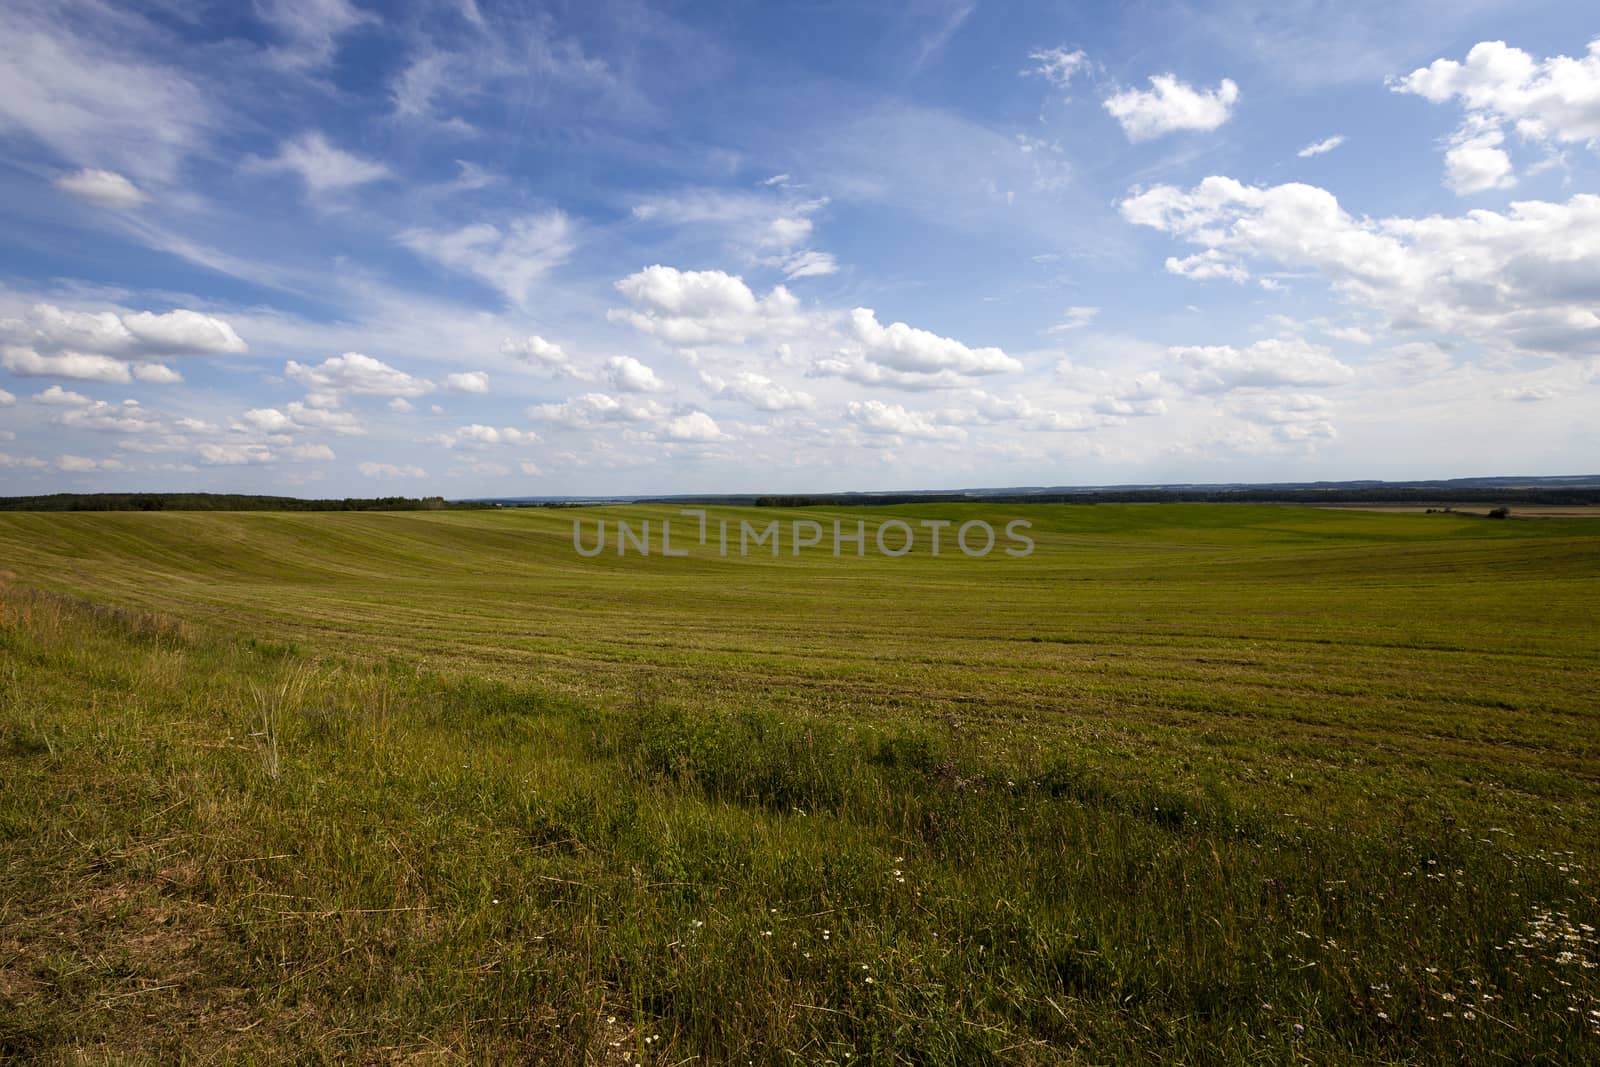   agriculture field on which grow wild flowers and green grass. In the background there is a hill and a small forest. Blue sky.